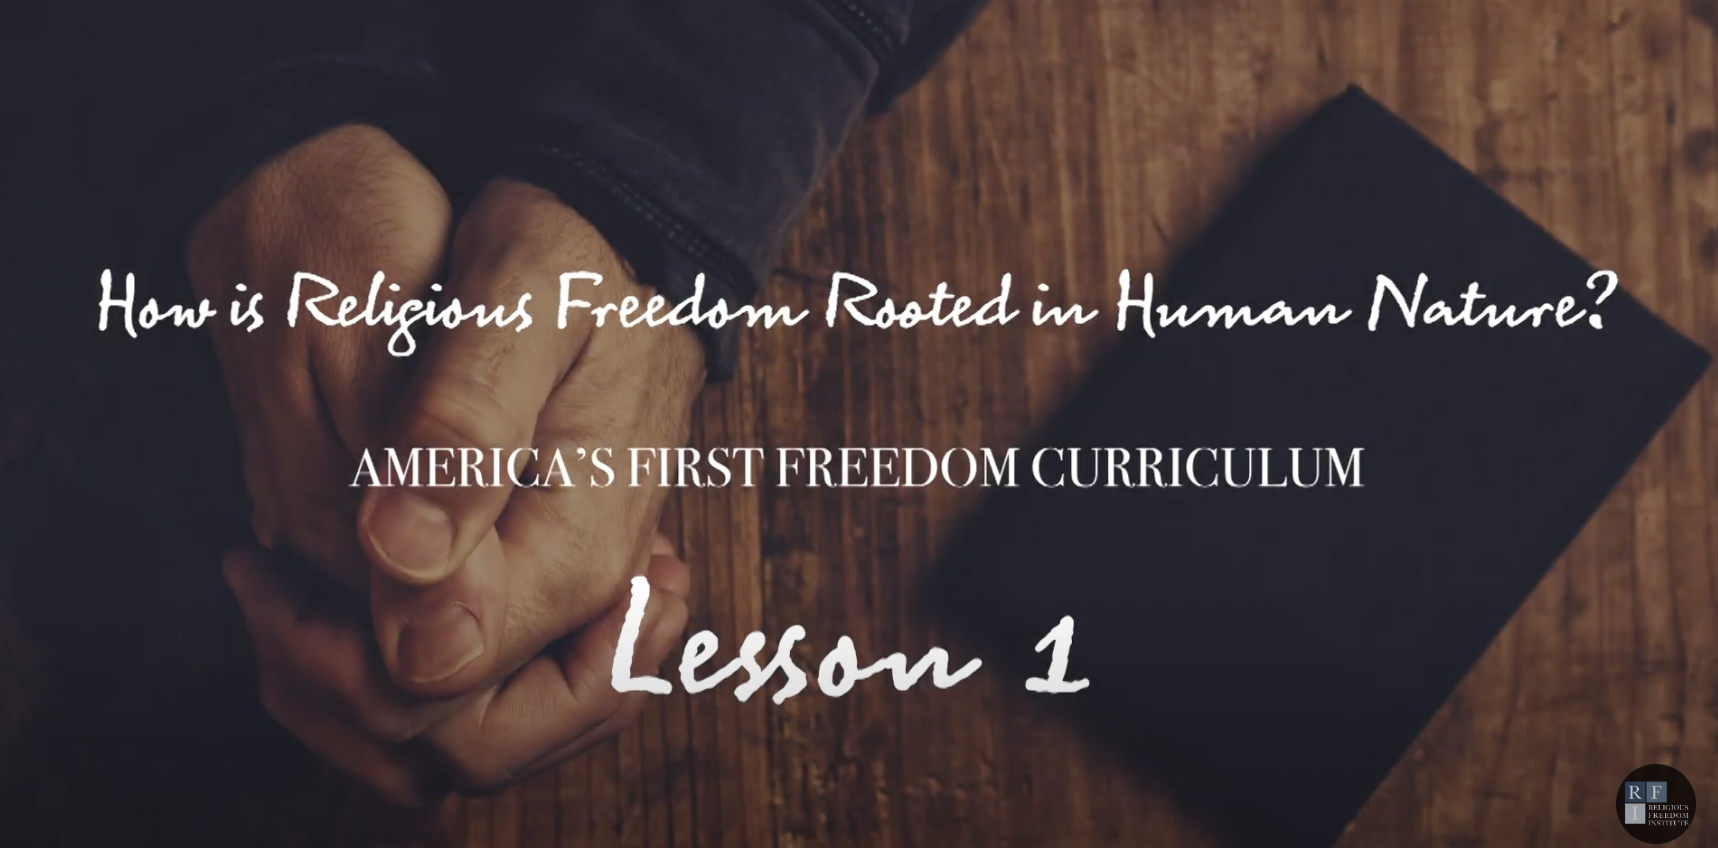 Featured image for “America’s First Freedom Curriculum Series | Video 4”